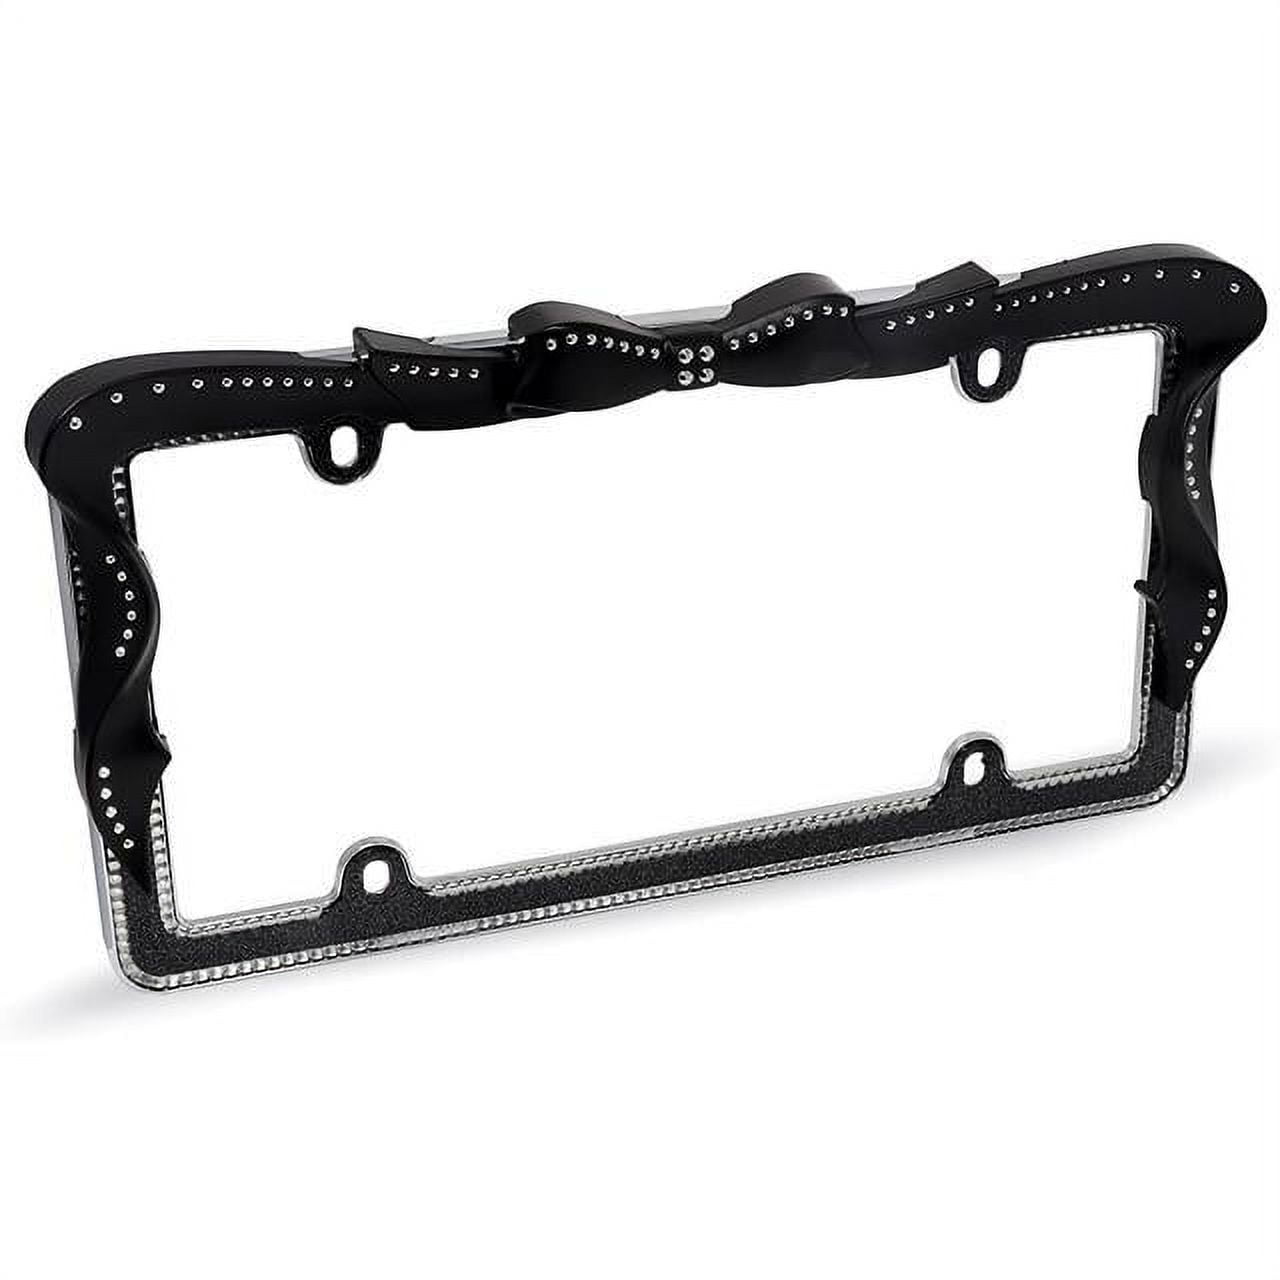 Custom Accessories 92520 Clear License Plate Protector